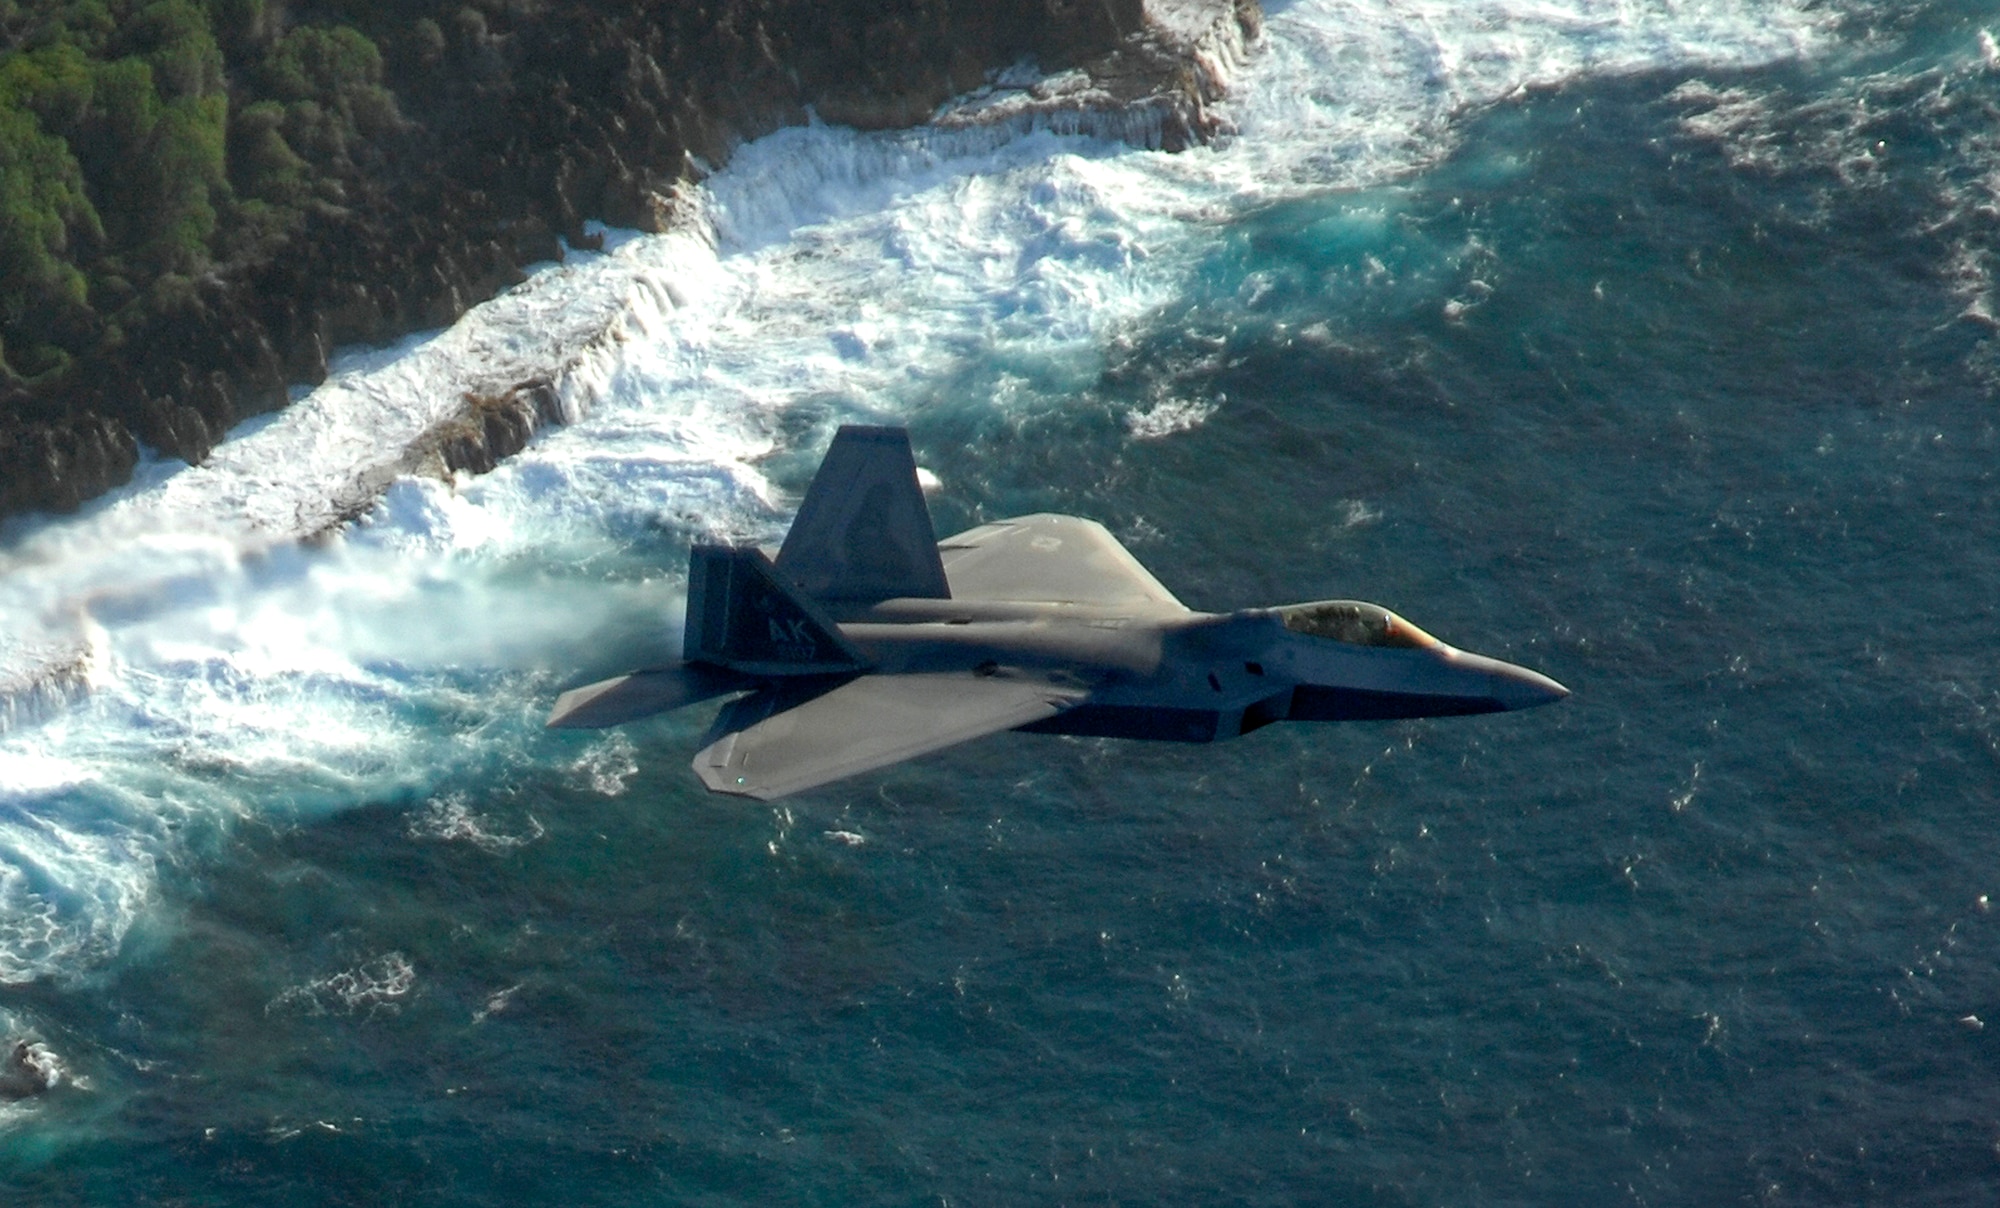 An F-22 Raptor from the 90th Fighter Squadron Elmendorf Air Force Base, Alaska flies over Guam for a training mission April 15.  The 90th FS from Elmendorf Air Force Base, Alaska just completed a 3-month deployment to Andersen as part of a theater security package. These deployments are a prudent measure to maintain a credible deterrent posture and presence for the region and demonstrate a continued U.S. commitment to fulfilling security responsibilities throughout the Western Pacific. (U.S. Air Force photo/ Master Sgt. Kevin J. Gruenwald) released      